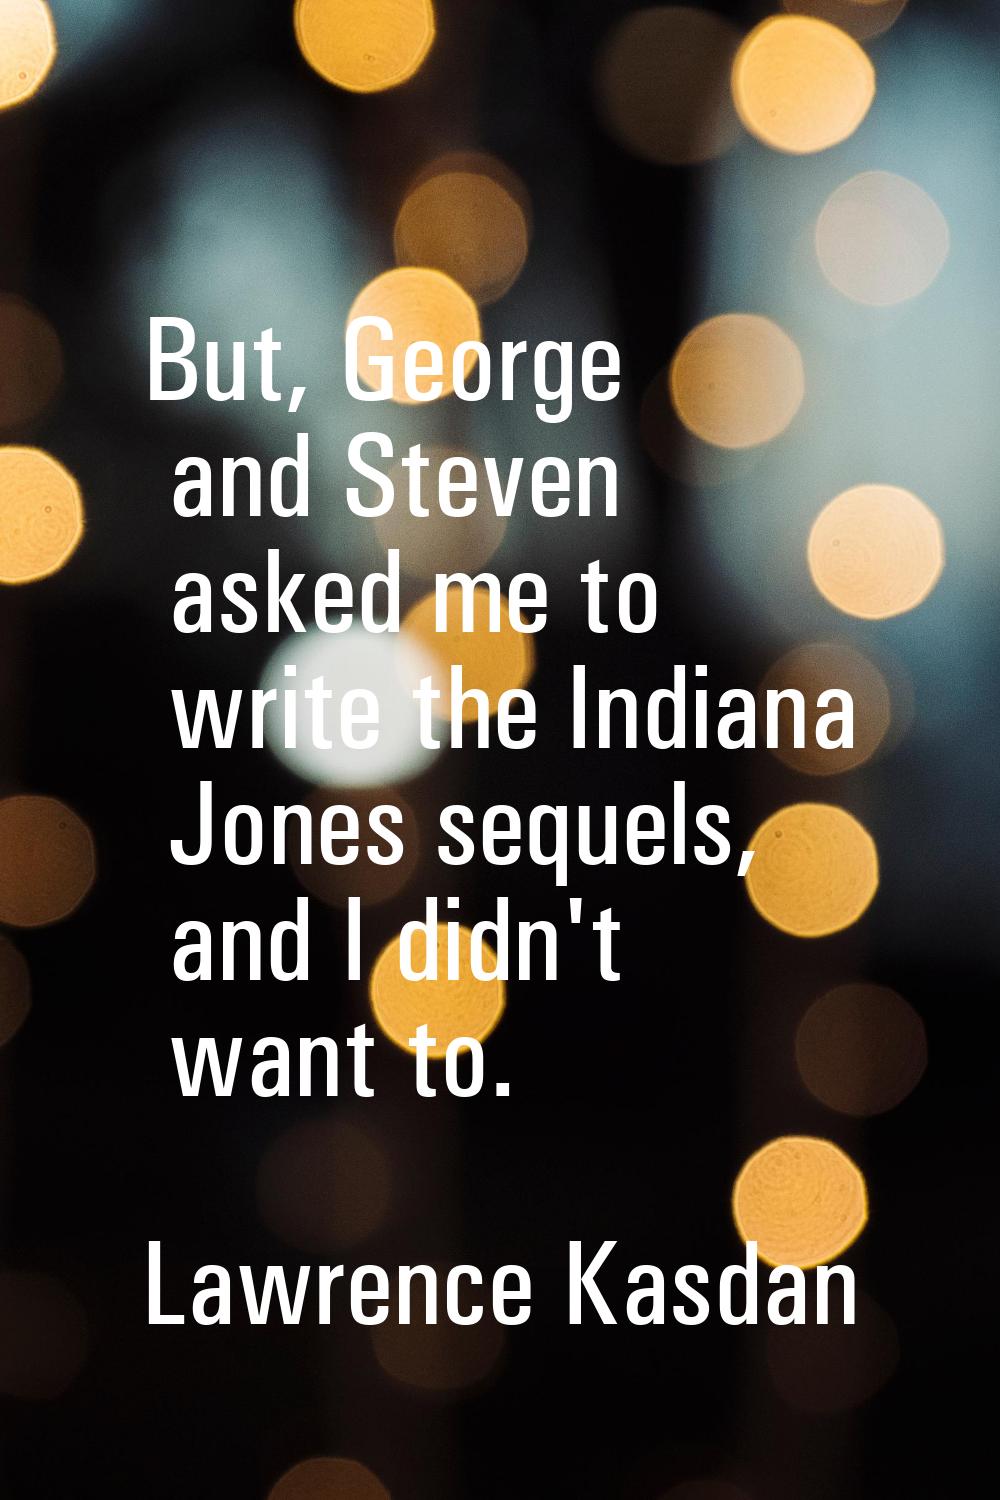 But, George and Steven asked me to write the Indiana Jones sequels, and I didn't want to.